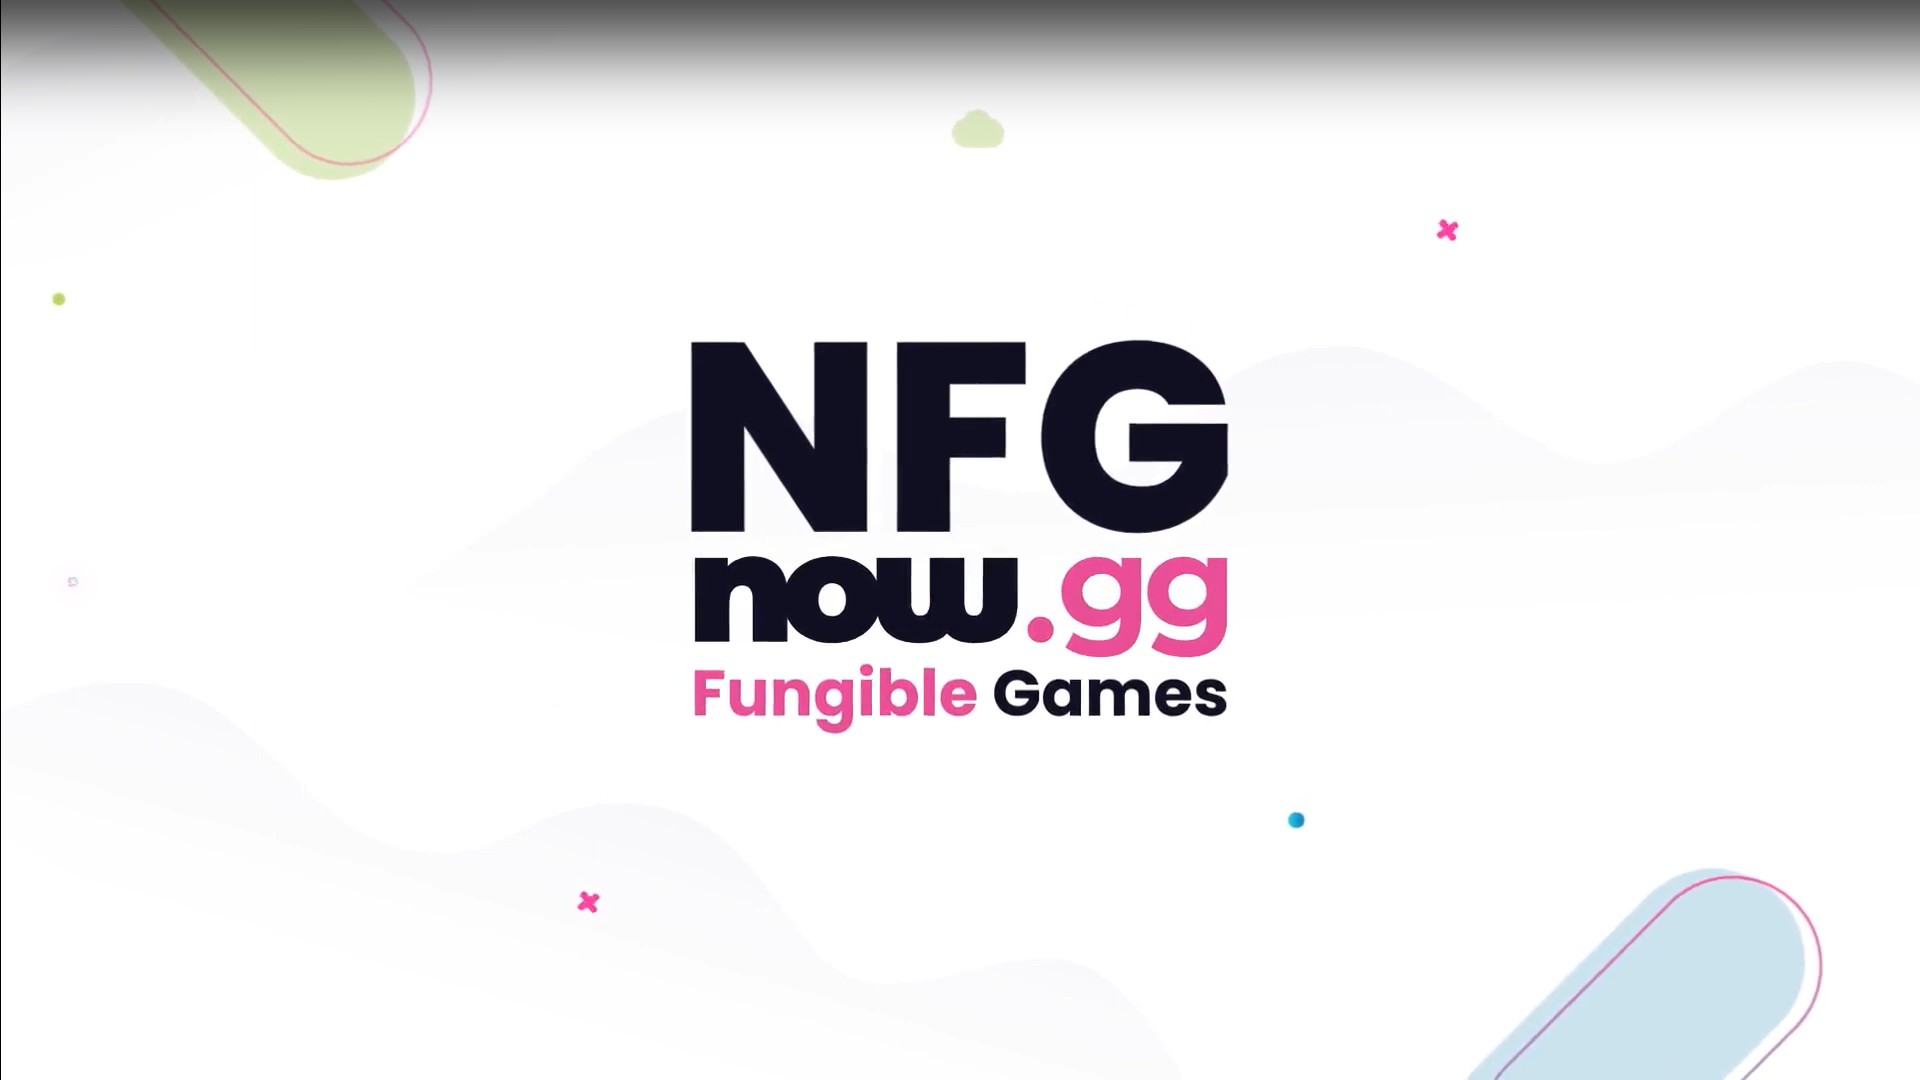 Metaverse mobile: now.gg's Fungible Games platform promises revolution in cloud mobile games thumbnail